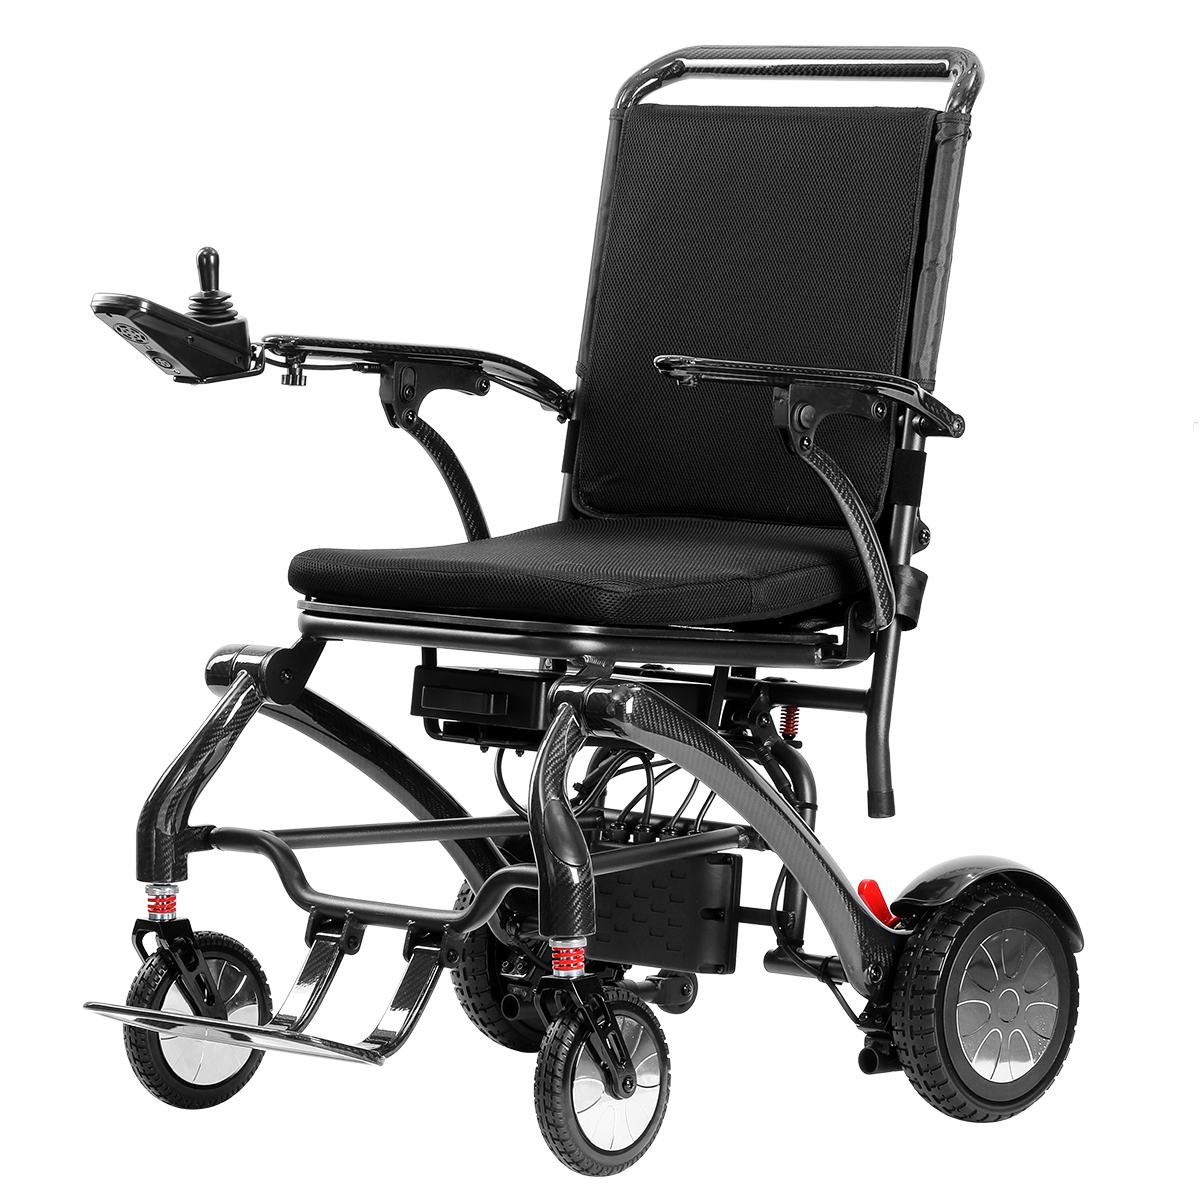 8 Important Matters for Portable Electric Wheelchairs